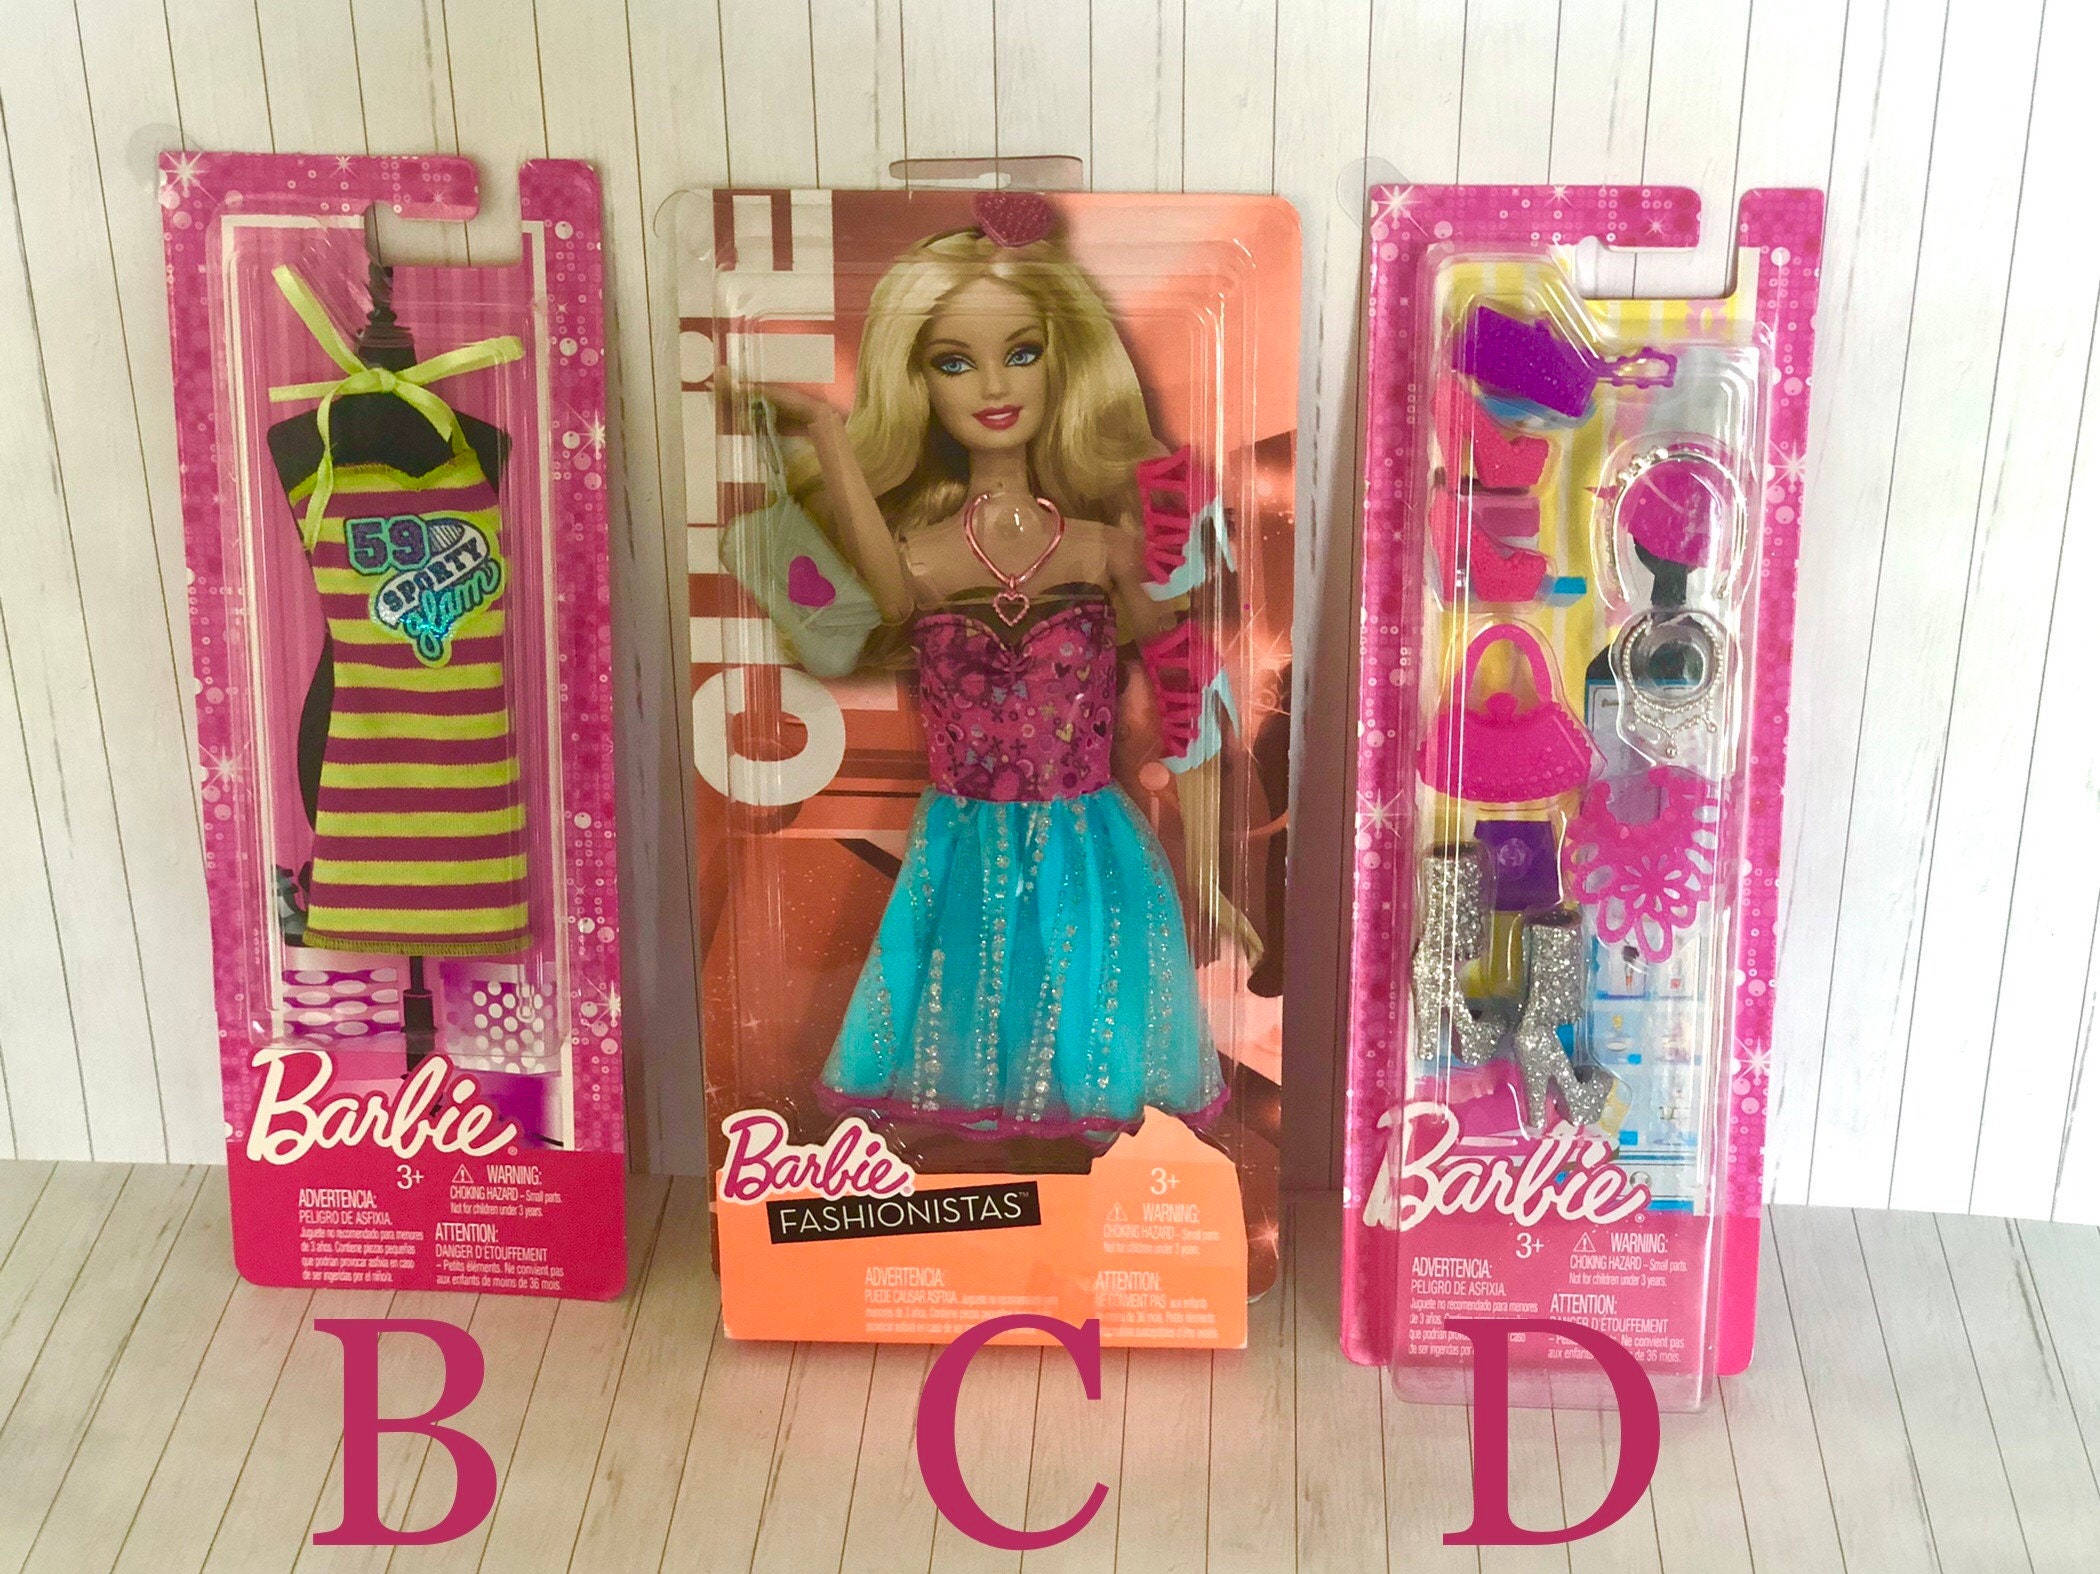 Barbie Vintage Fashion and Accessories Packs From Different Eras ...